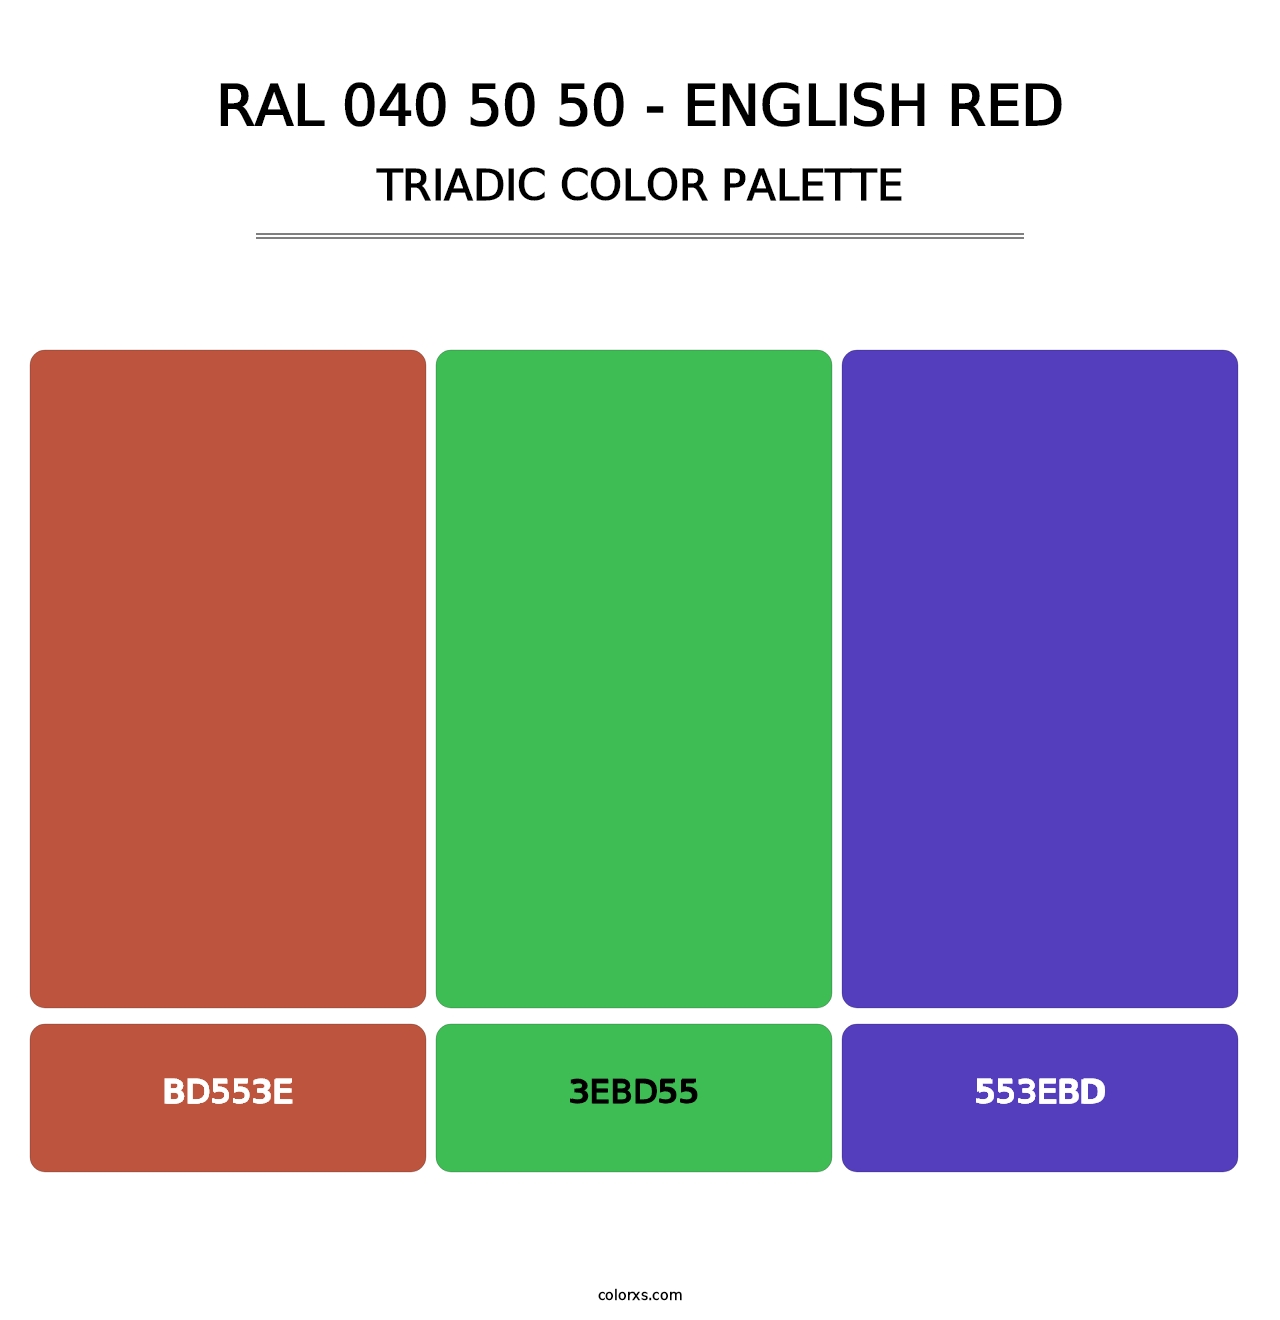 RAL 040 50 50 - English Red - Triadic Color Palette